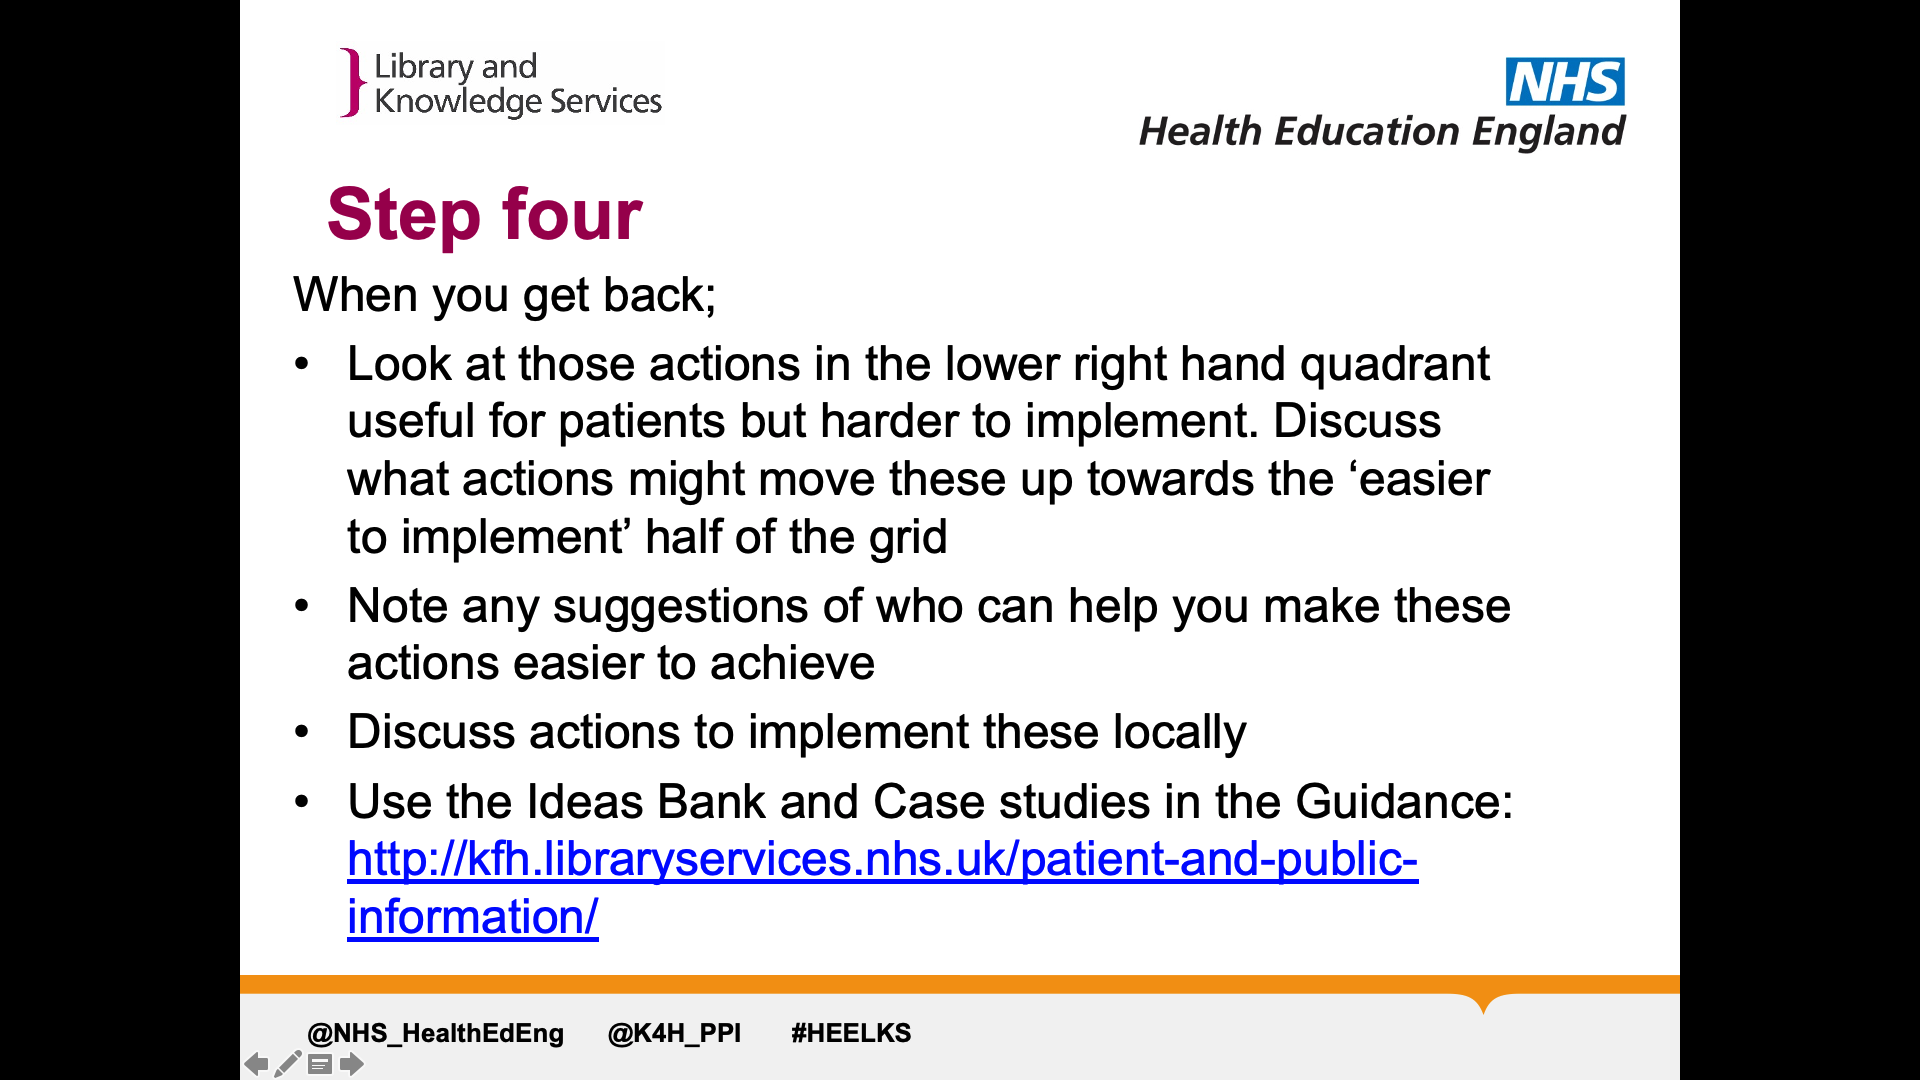 Text on page: When you get back;   Look at those actions in the lower right hand quadrant useful for patients but harder to implement. Discuss what actions might move these up towards the ‘easier to implement’ half of the grid  Note any suggestions of who can help you make these actions easier to achieve Discuss actions to implement these locally  Use the Ideas Bank and Case studies in the Guidance